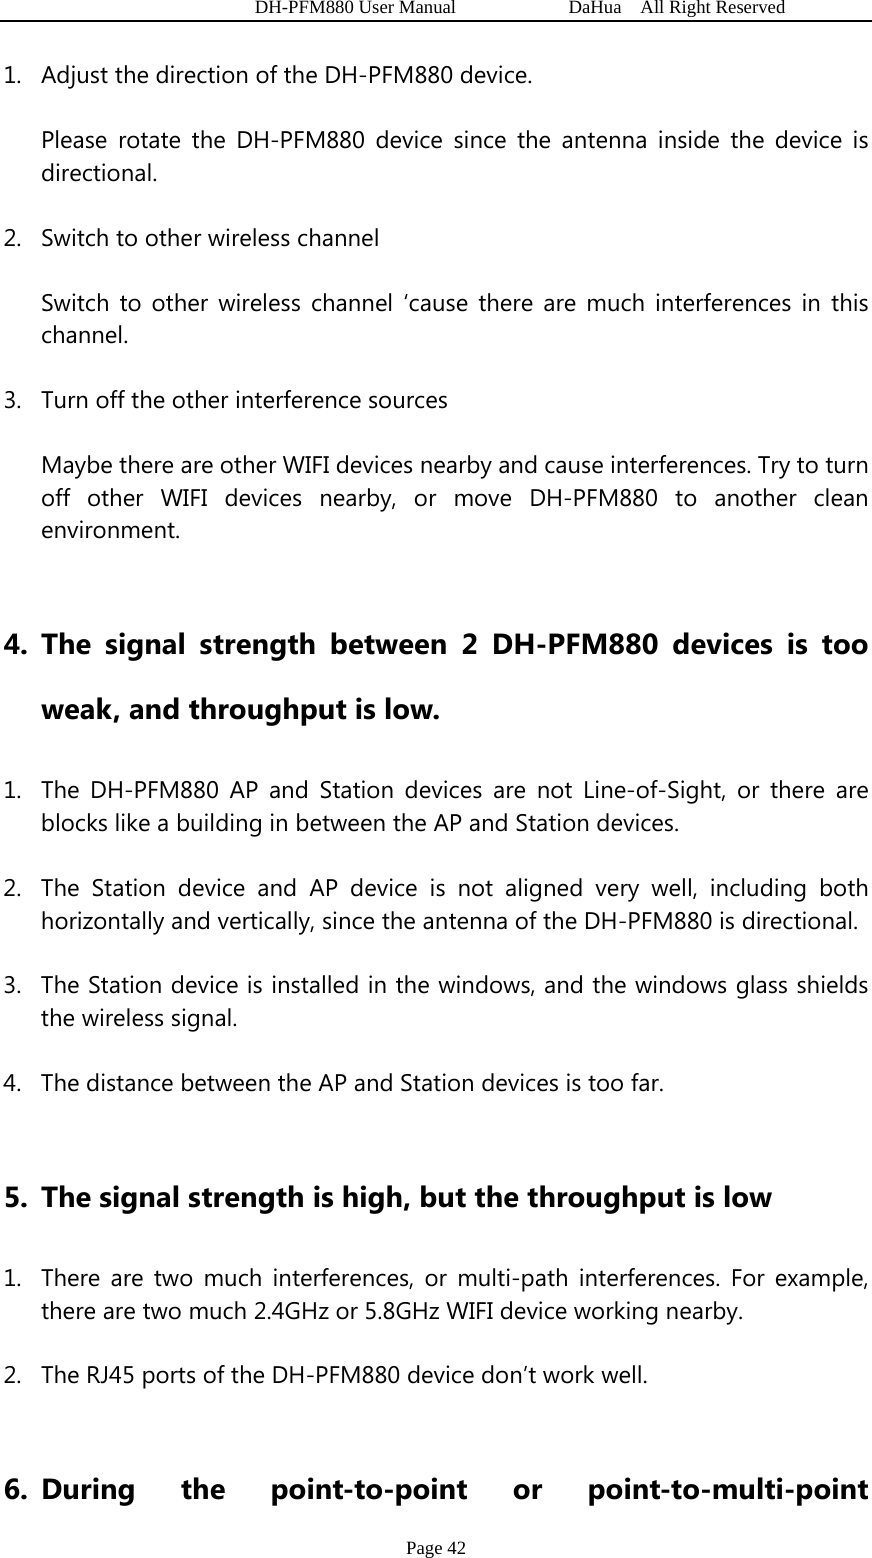   DH-PFM880 User Manual            DaHua  All Right Reserved Page 42 1. Adjust the direction of the DH-PFM880 device. Please rotate the DH-PFM880 device since the antenna inside the device is directional. 2. Switch to other wireless channel Switch to other wireless channel ‘cause there are much interferences in this channel. 3. Turn off the other interference sources Maybe there are other WIFI devices nearby and cause interferences. Try to turn off other WIFI devices nearby, or move DH-PFM880 to another clean environment.   4. The signal strength between 2 DH-PFM880 devices is too weak, and throughput is low. 1. The DH-PFM880 AP and Station devices are not Line-of-Sight, or there are blocks like a building in between the AP and Station devices. 2. The Station device and AP device is not aligned very well, including both horizontally and vertically, since the antenna of the DH-PFM880 is directional. 3. The Station device is installed in the windows, and the windows glass shields the wireless signal. 4. The distance between the AP and Station devices is too far.  5. The signal strength is high, but the throughput is low 1. There are two much interferences, or multi-path interferences. For example, there are two much 2.4GHz or 5.8GHz WIFI device working nearby. 2. The RJ45 ports of the DH-PFM880 device don’t work well.  6. During the point-to-point or point-to-multi-point 